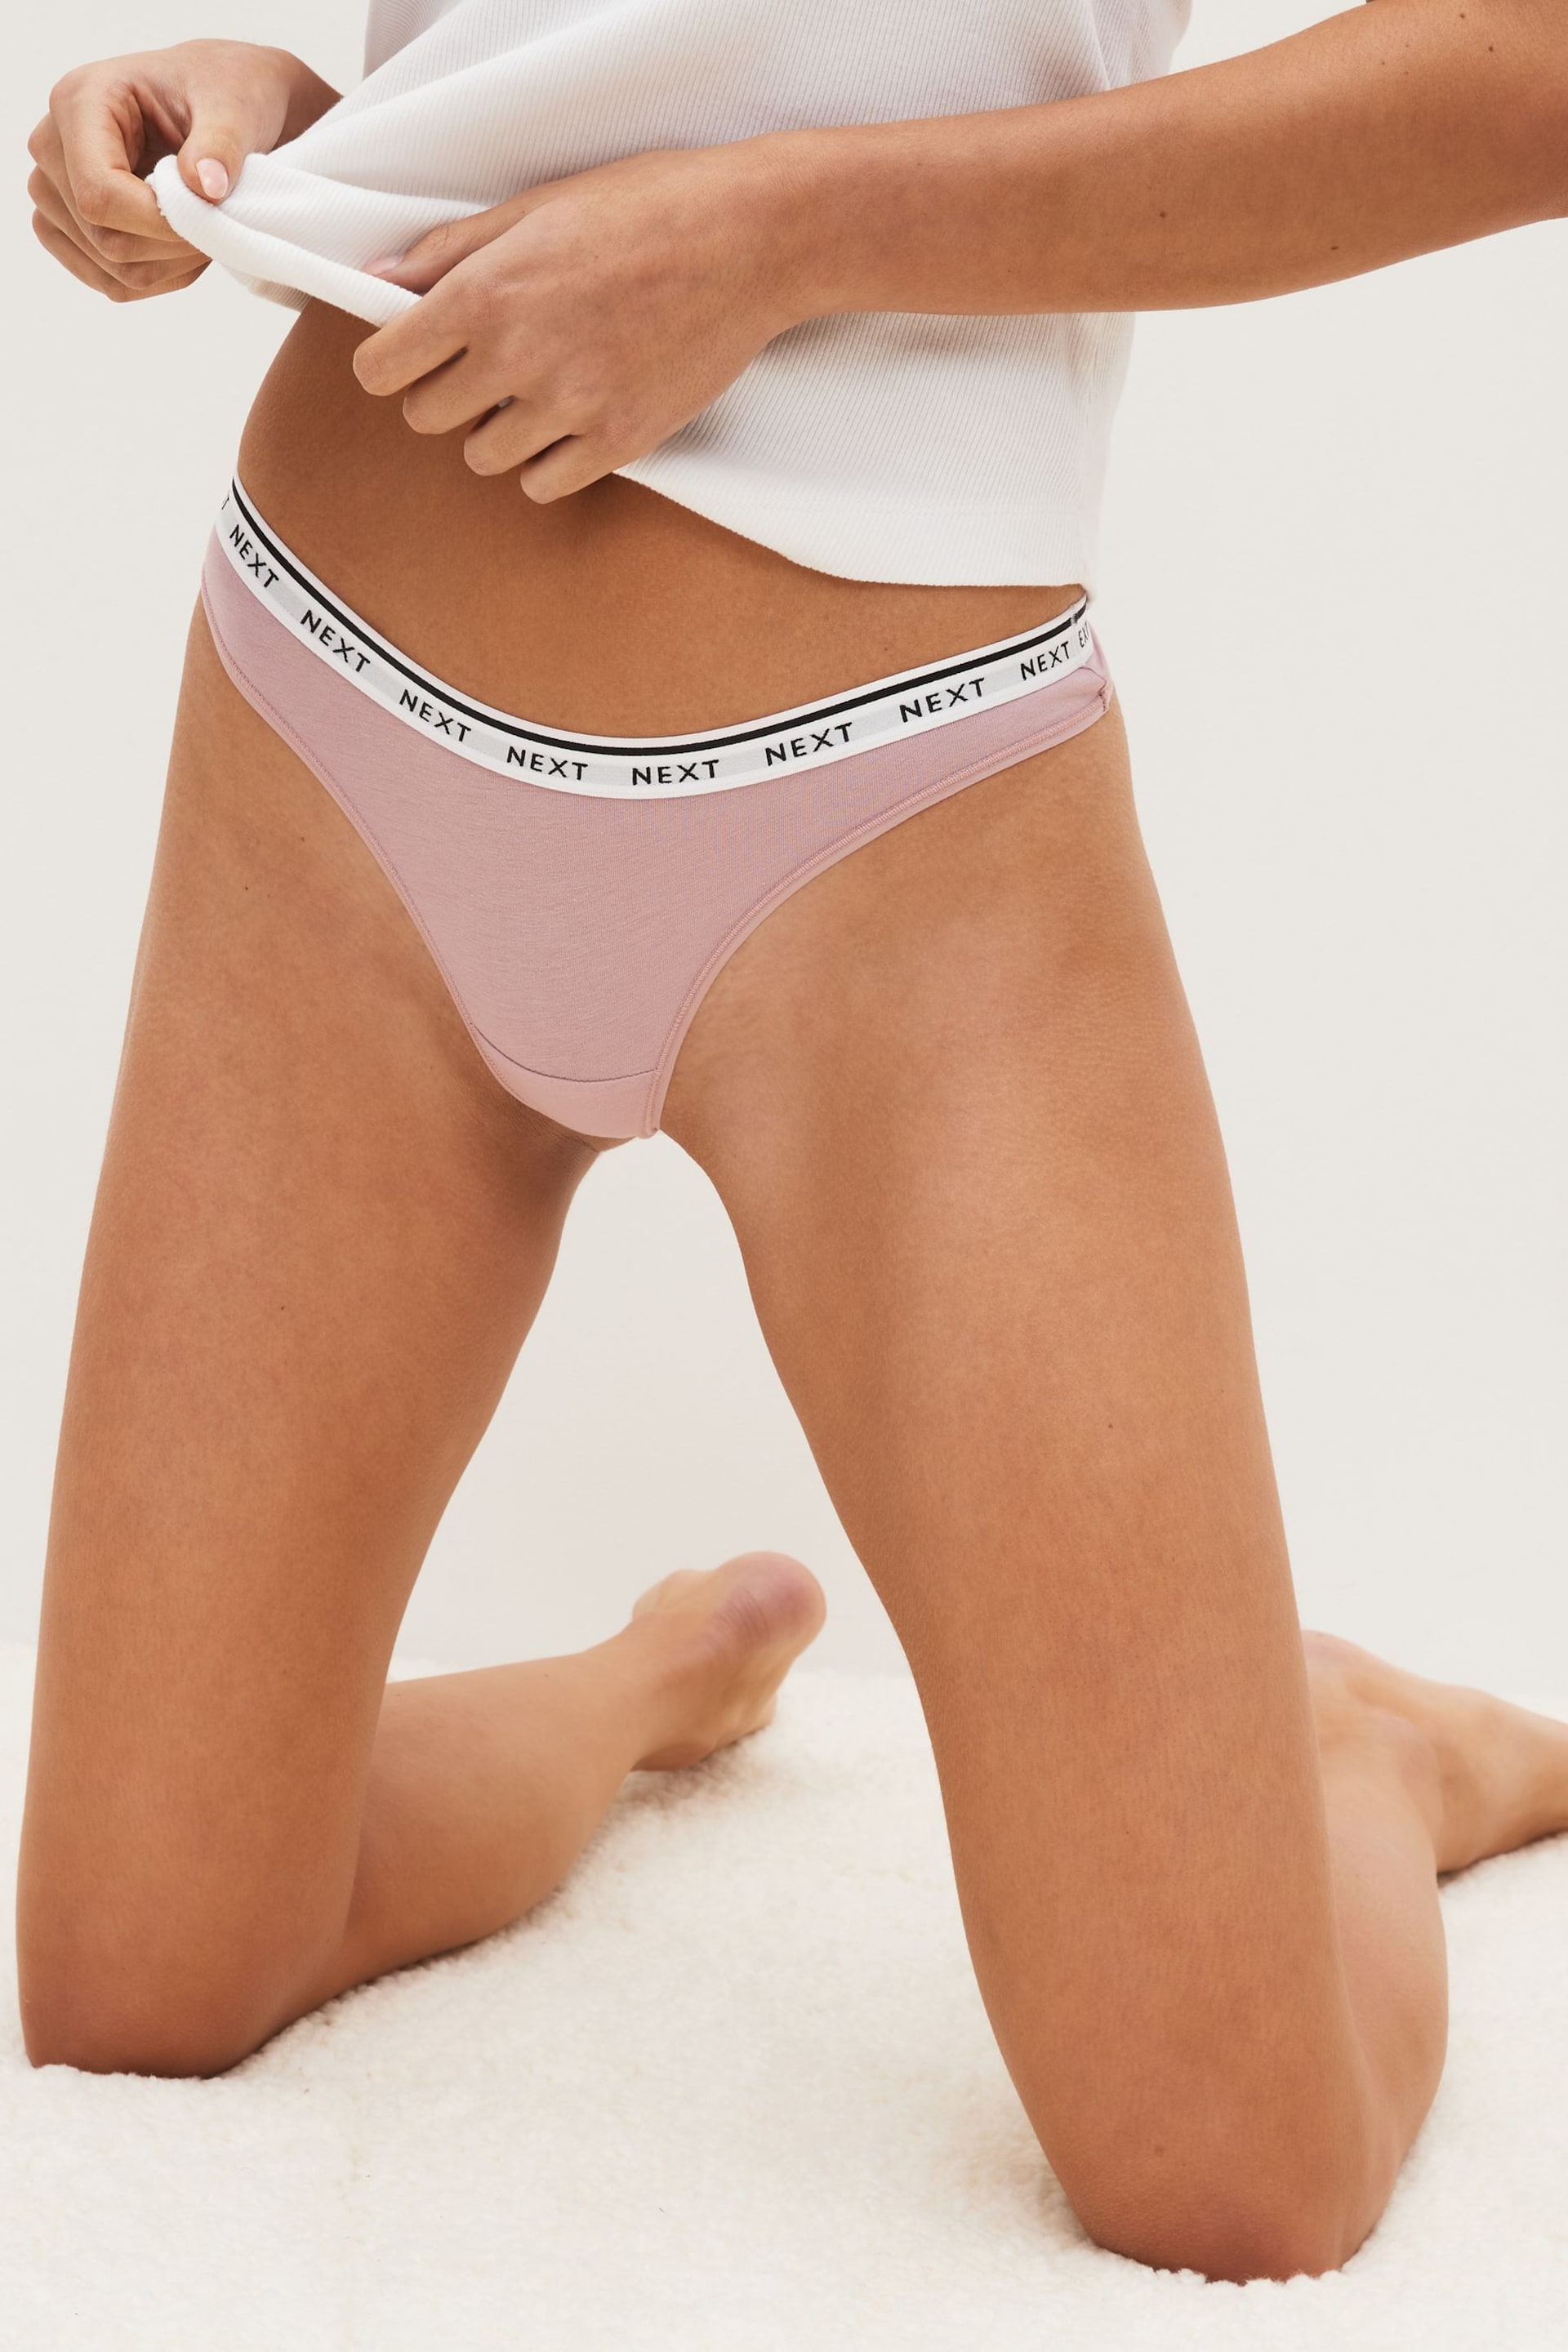 White/Grey/Pink/Light Green Thong Cotton Rich Logo Knickers 4 Pack - Image 2 of 8